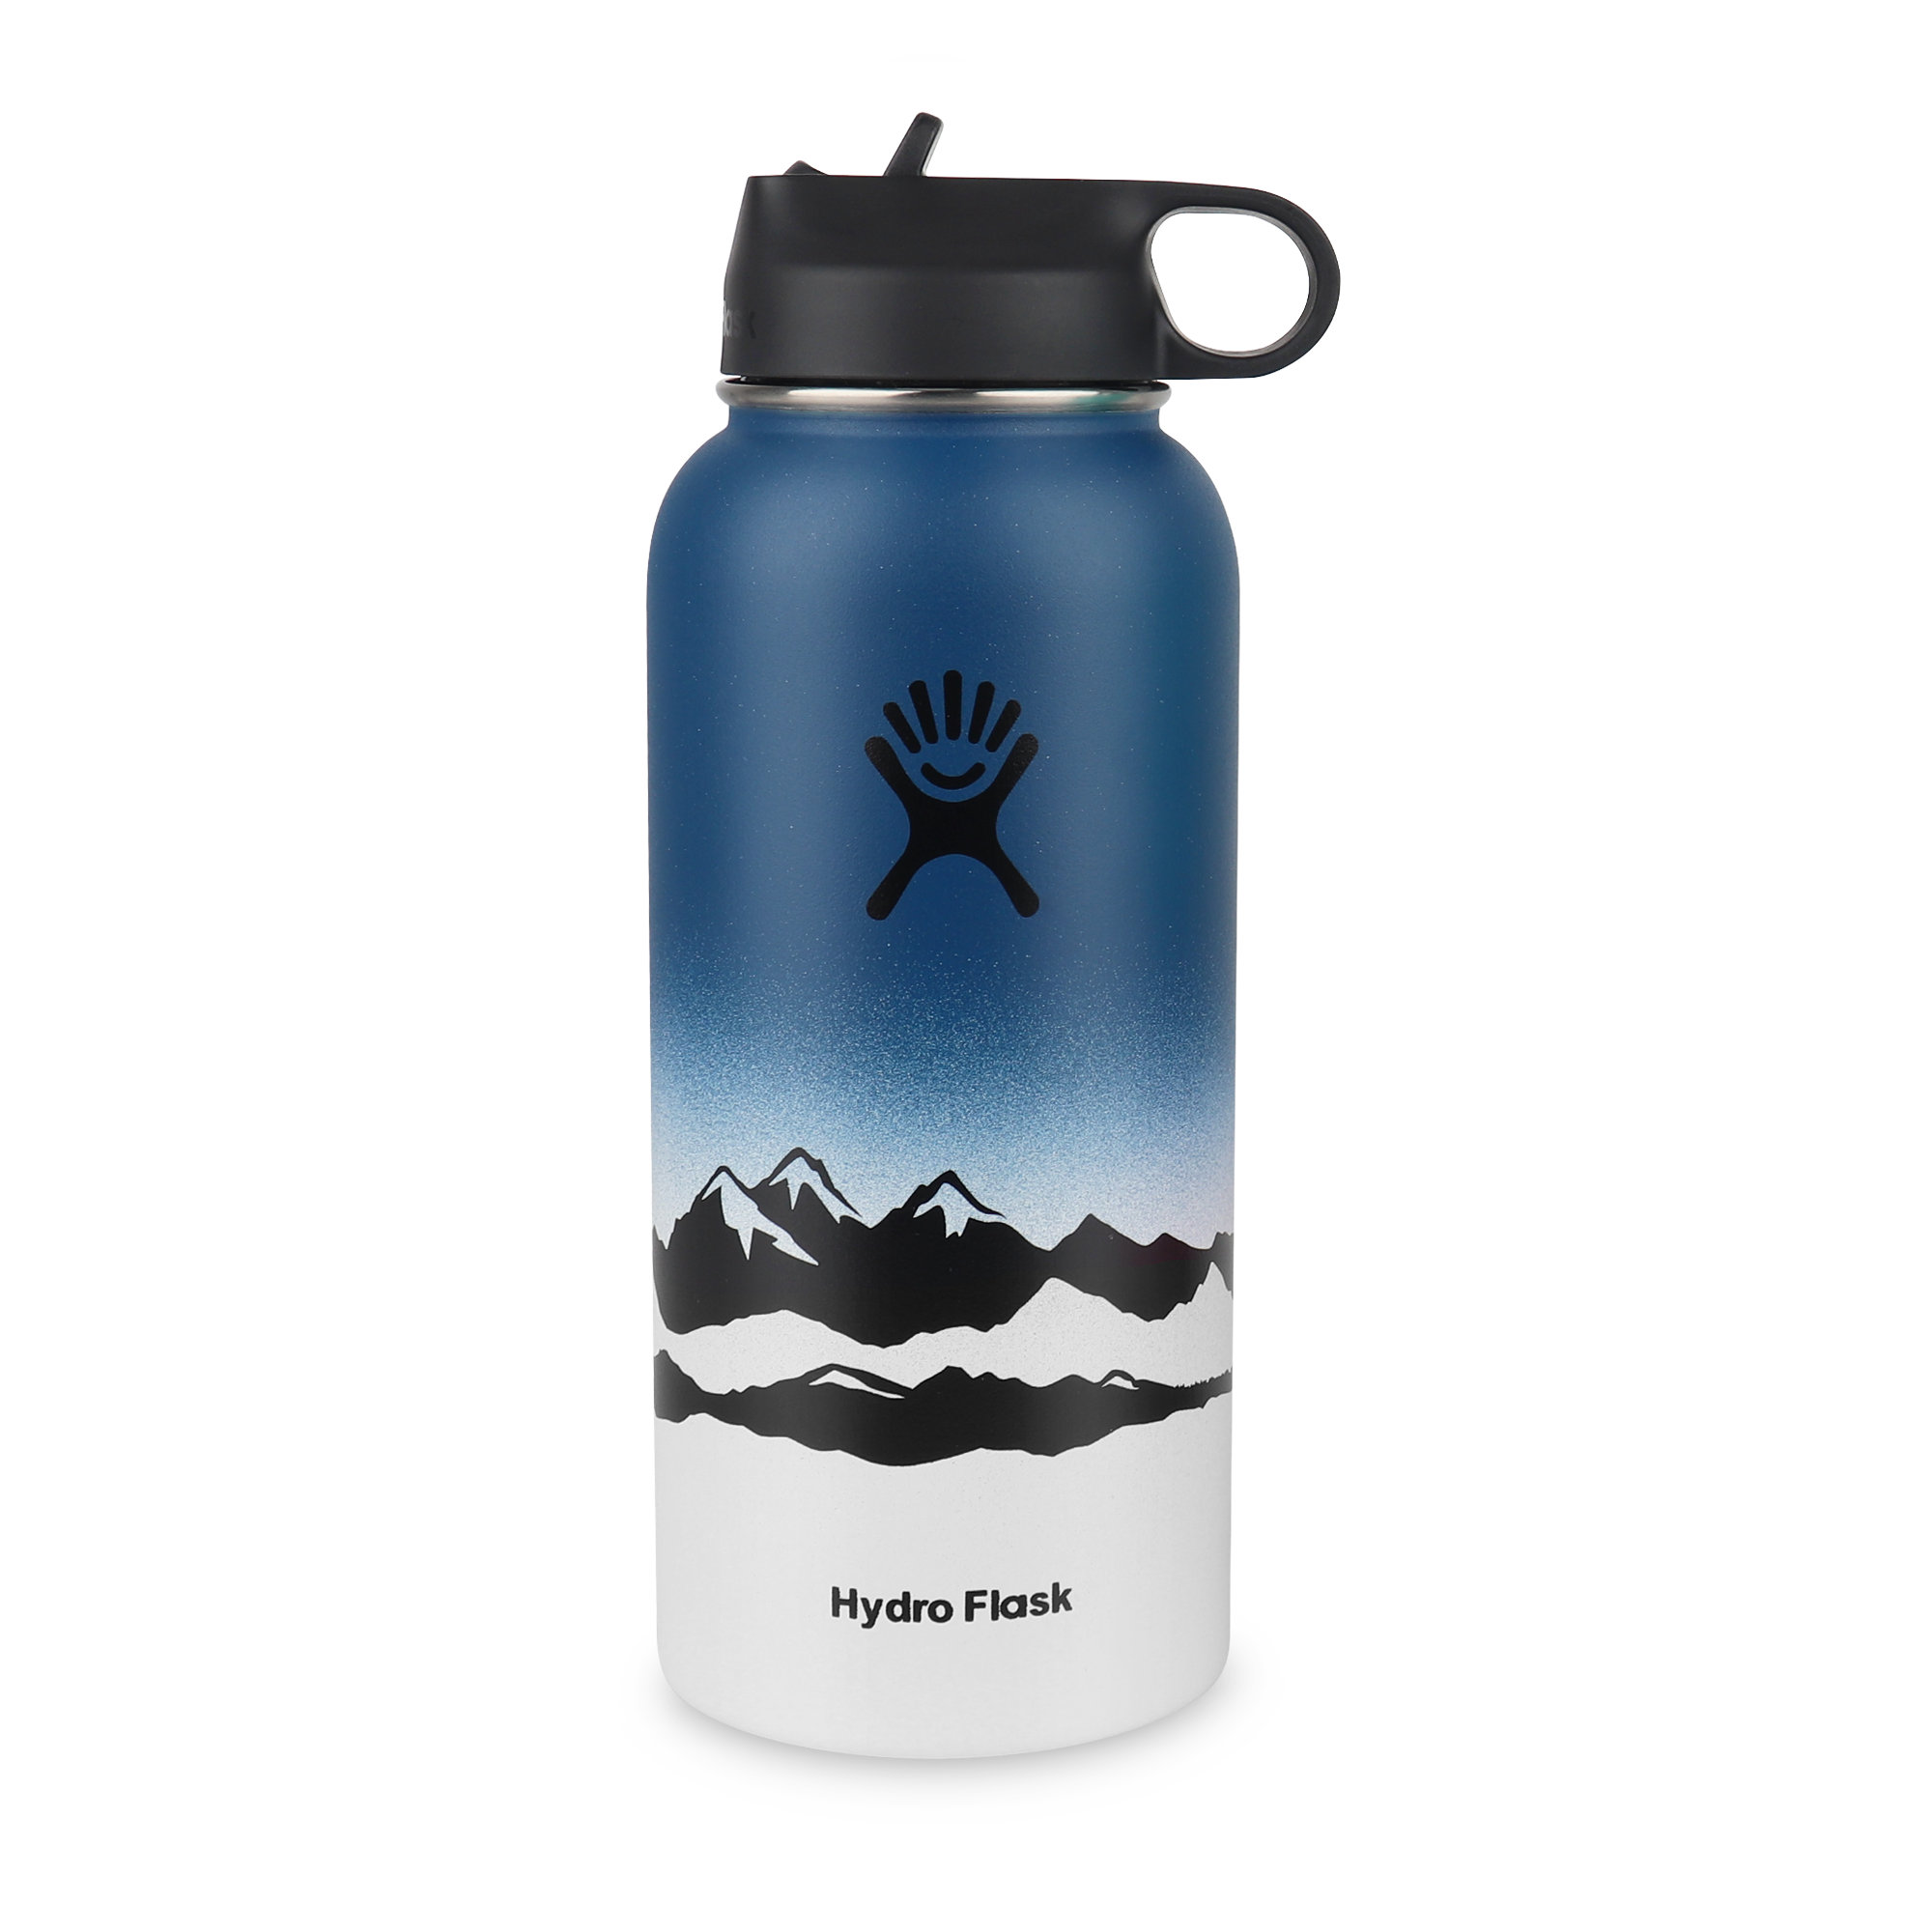  Hydro Flask 32 oz. Water Bottle - Stainless Steel, Reusable,  Vacuum Insulated- Wide Mouth with Leak Proof Flex Cap : Home & Kitchen